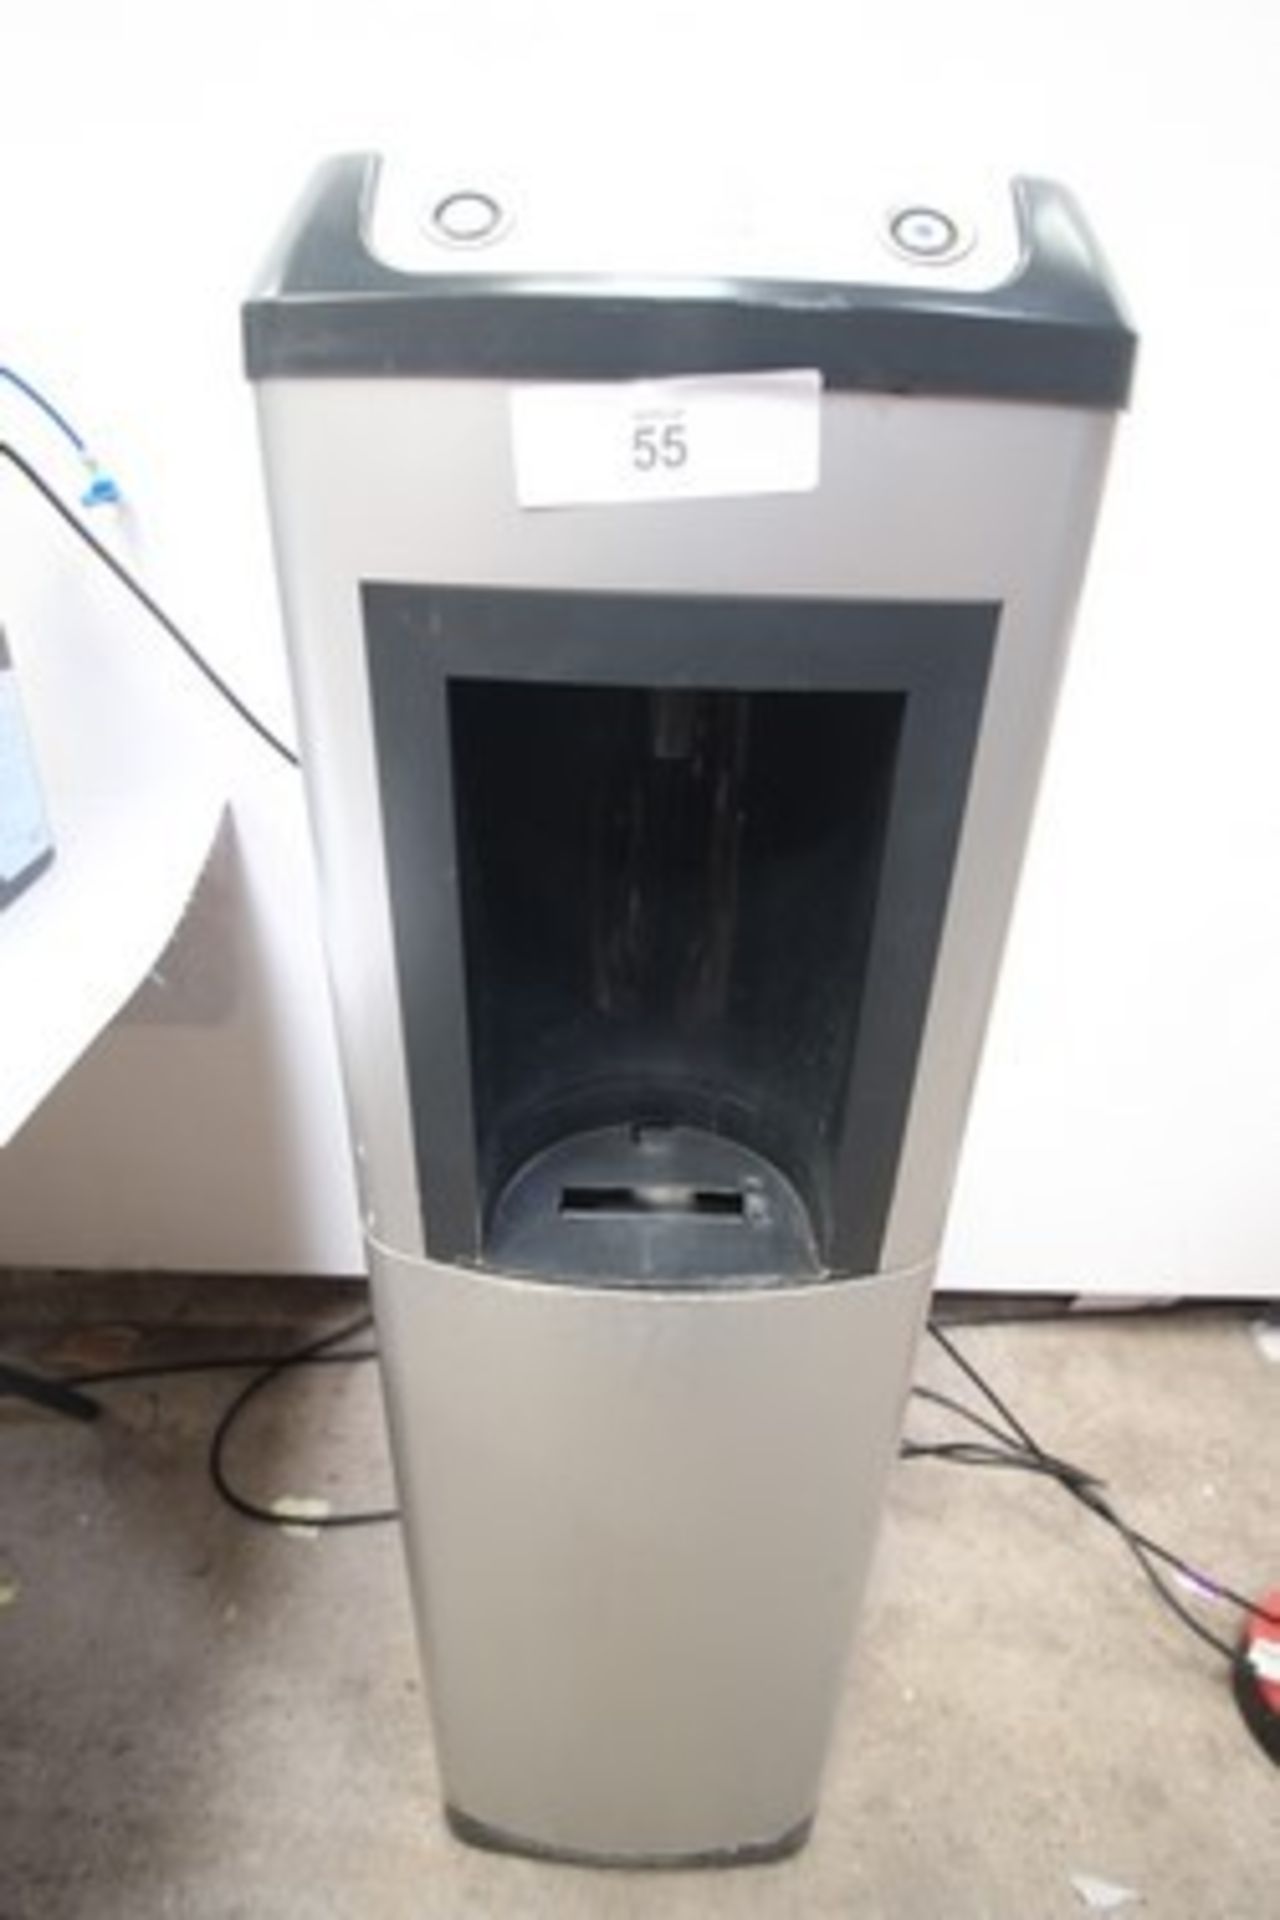 1 x Oasis water cooler, together with 1 x Borg Overstrom water cooler, both power on ok, not tested, - Image 2 of 3